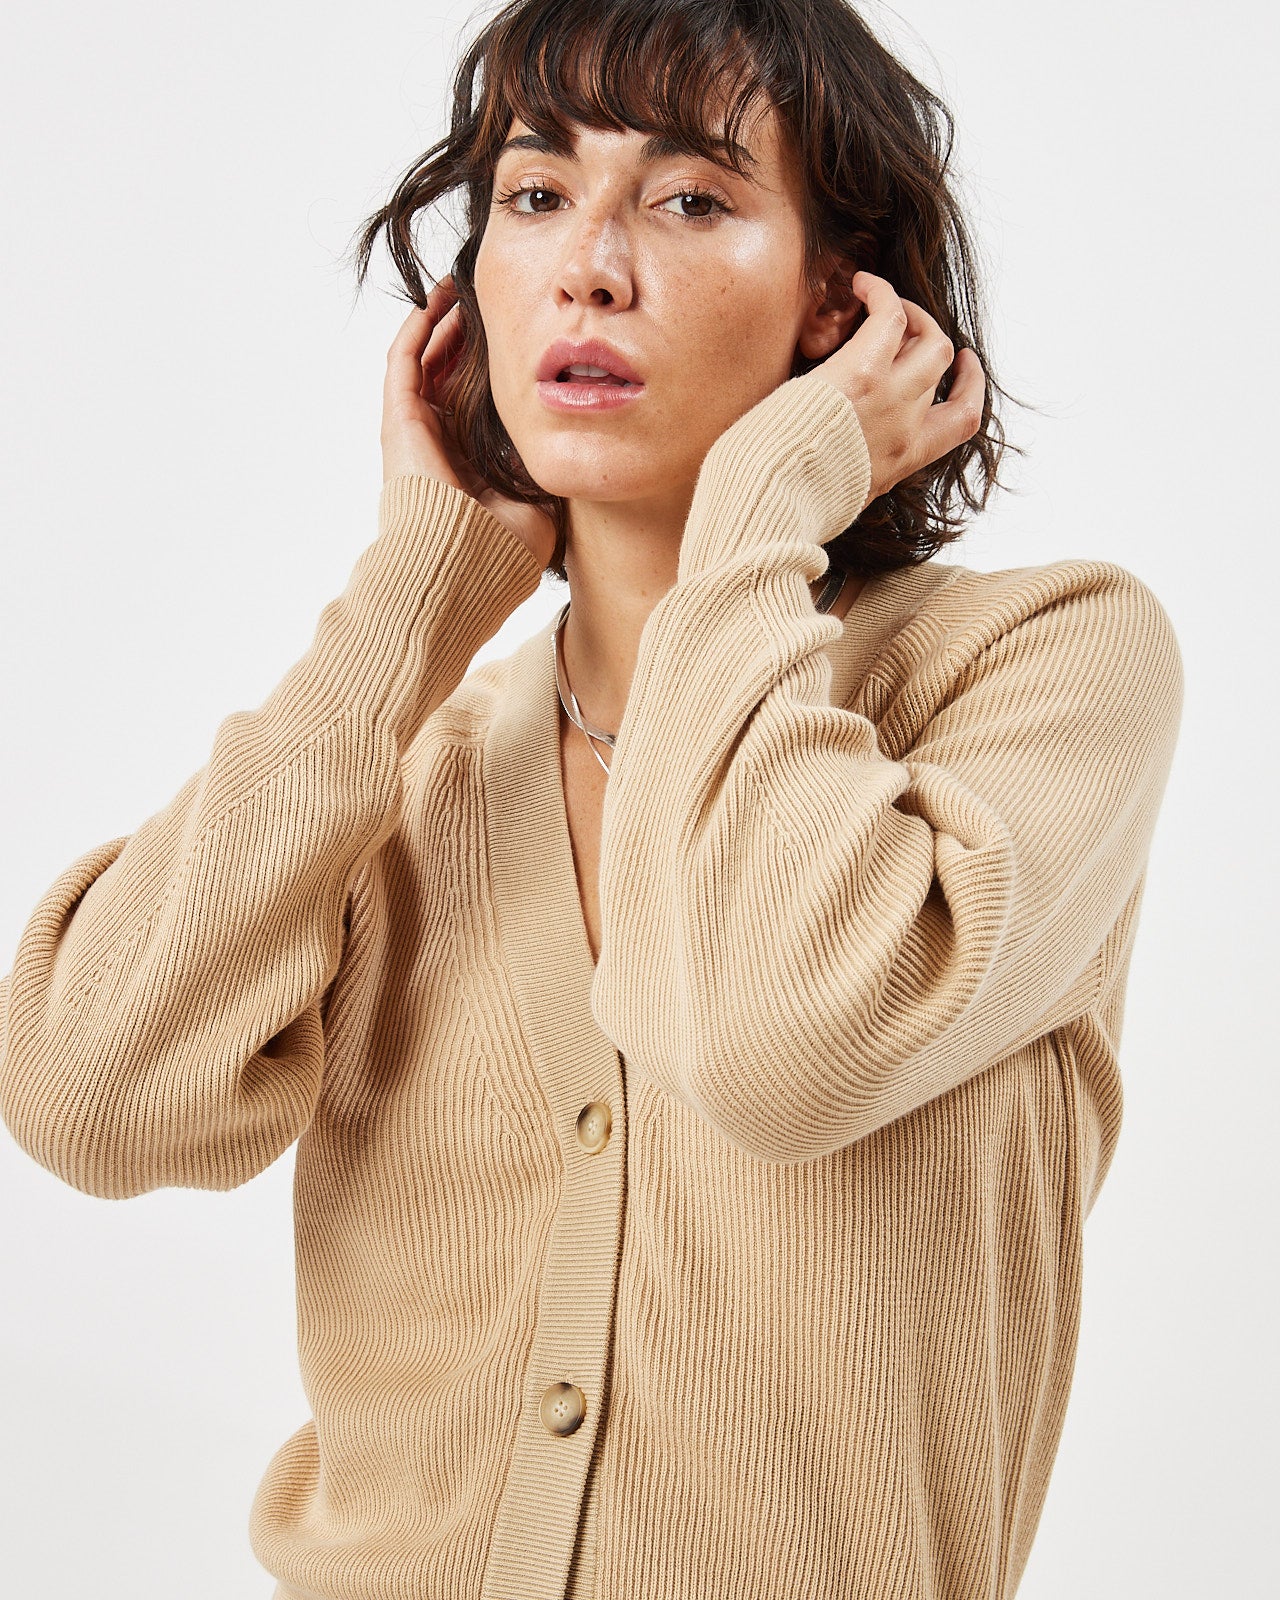 close up of the Minimum Women's Cardine Cardigan in Safari on a model posing with her hands in her hair